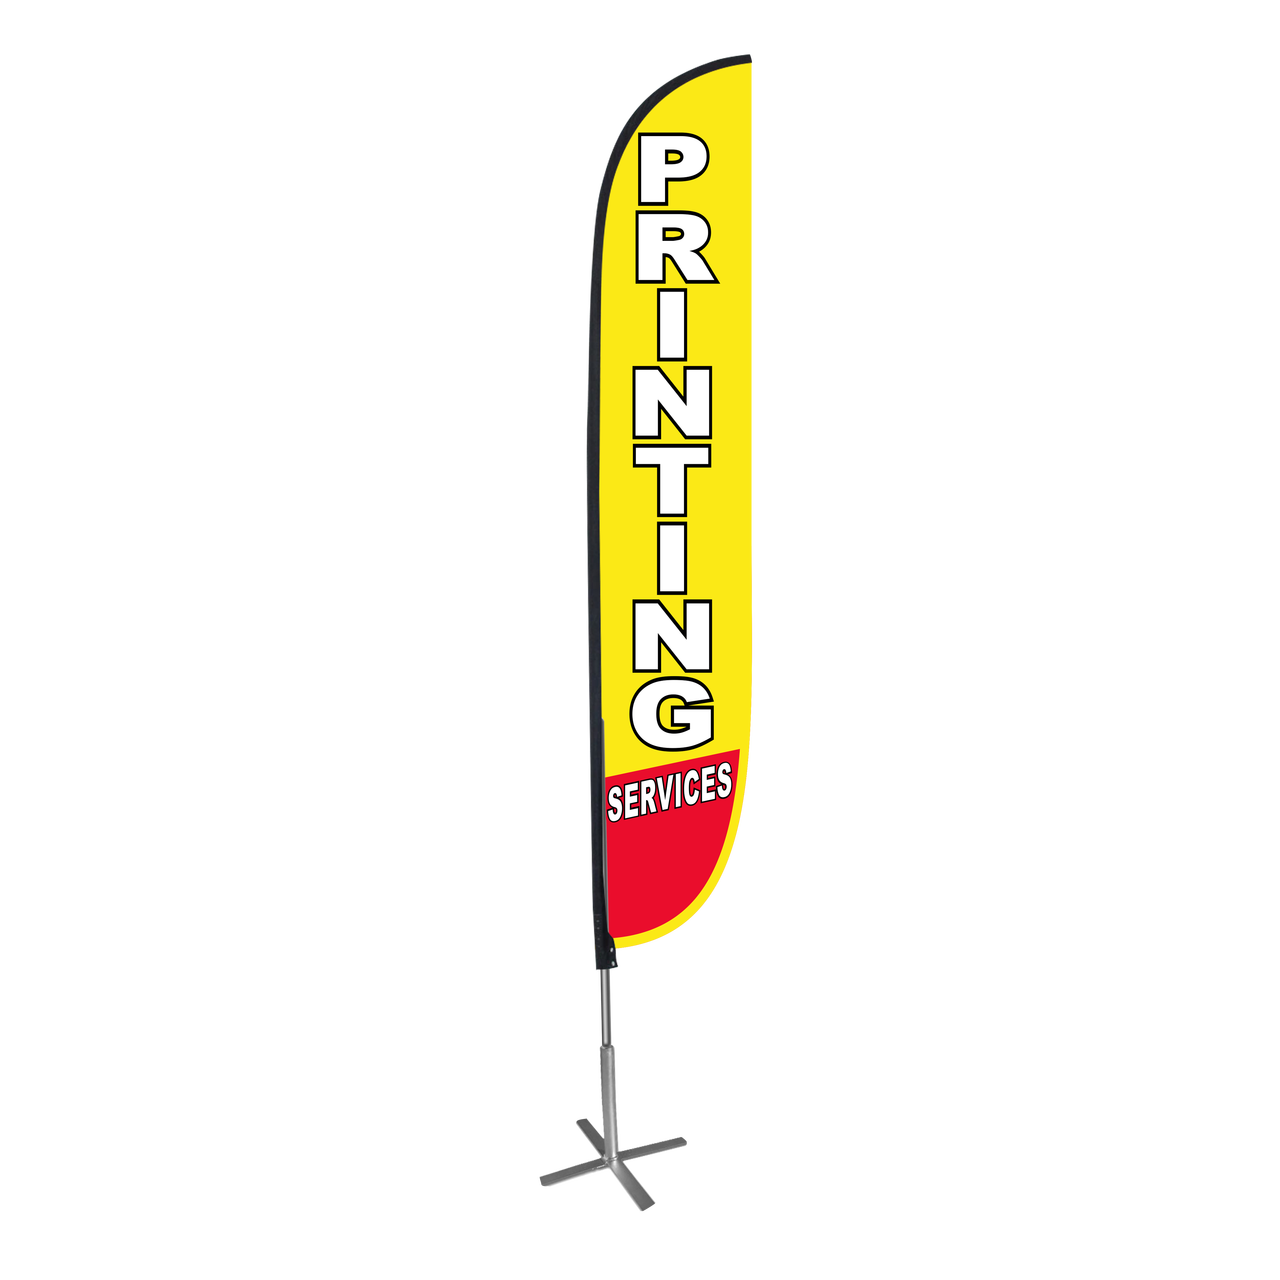 12ft Printing Services Feather Flag Yellow